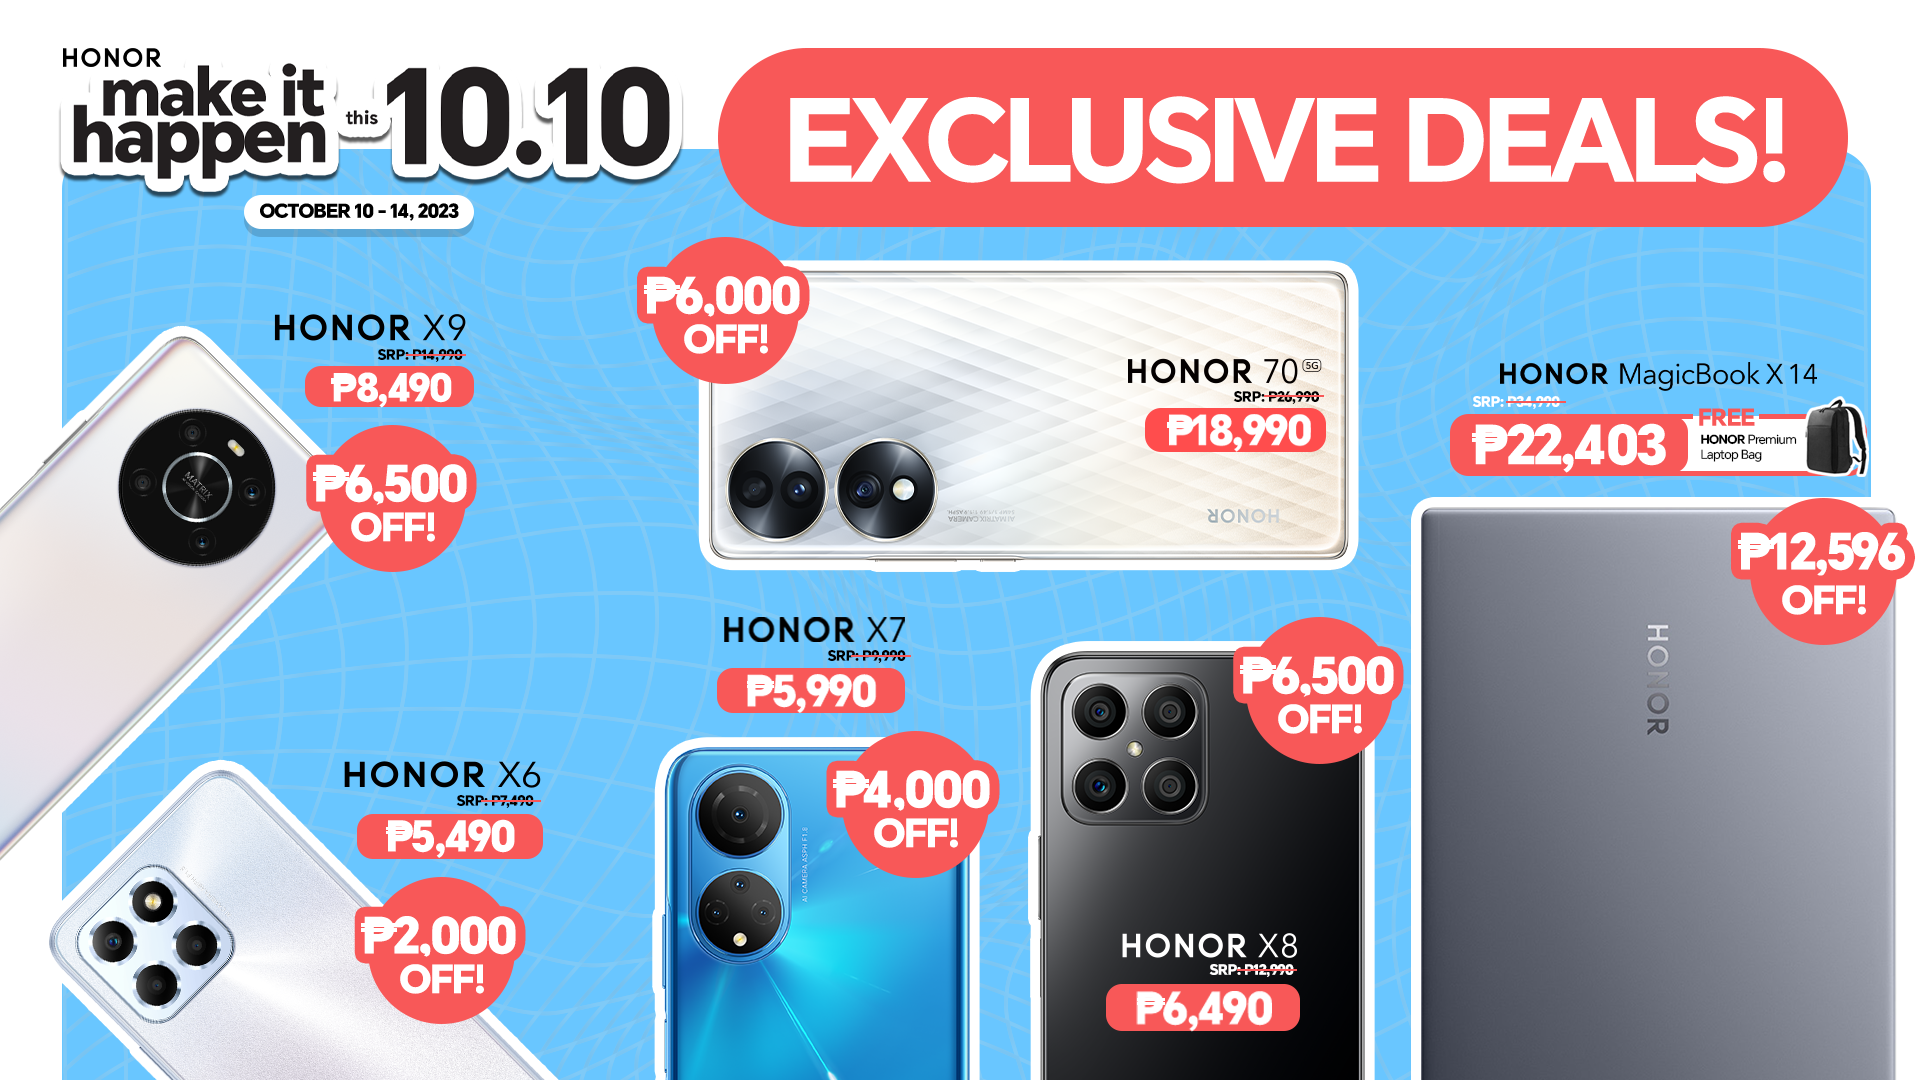 This is how you can get over 10K discount on HONOR gadgets this 10.10 sale!